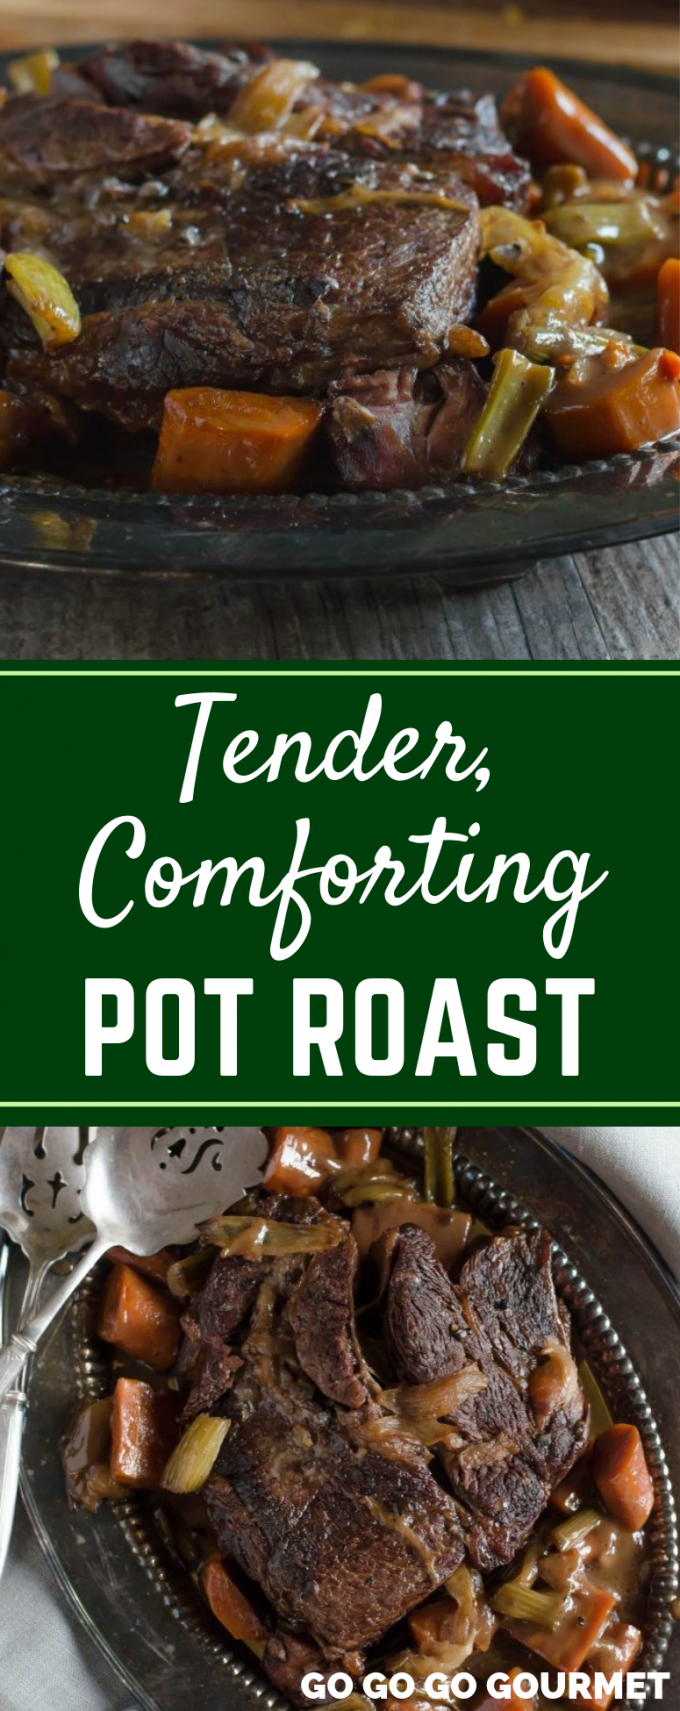 While this can also be made in the slow cooker, crockpot or Instapot, this easy Tender Pot Roast recipe is made in the oven. Move over Pioneer Woman, this is one of the best pot roast recipes! #gogogogourmet #tenderpotroast #potroast #easypotroastrecipe via @gogogogourmet